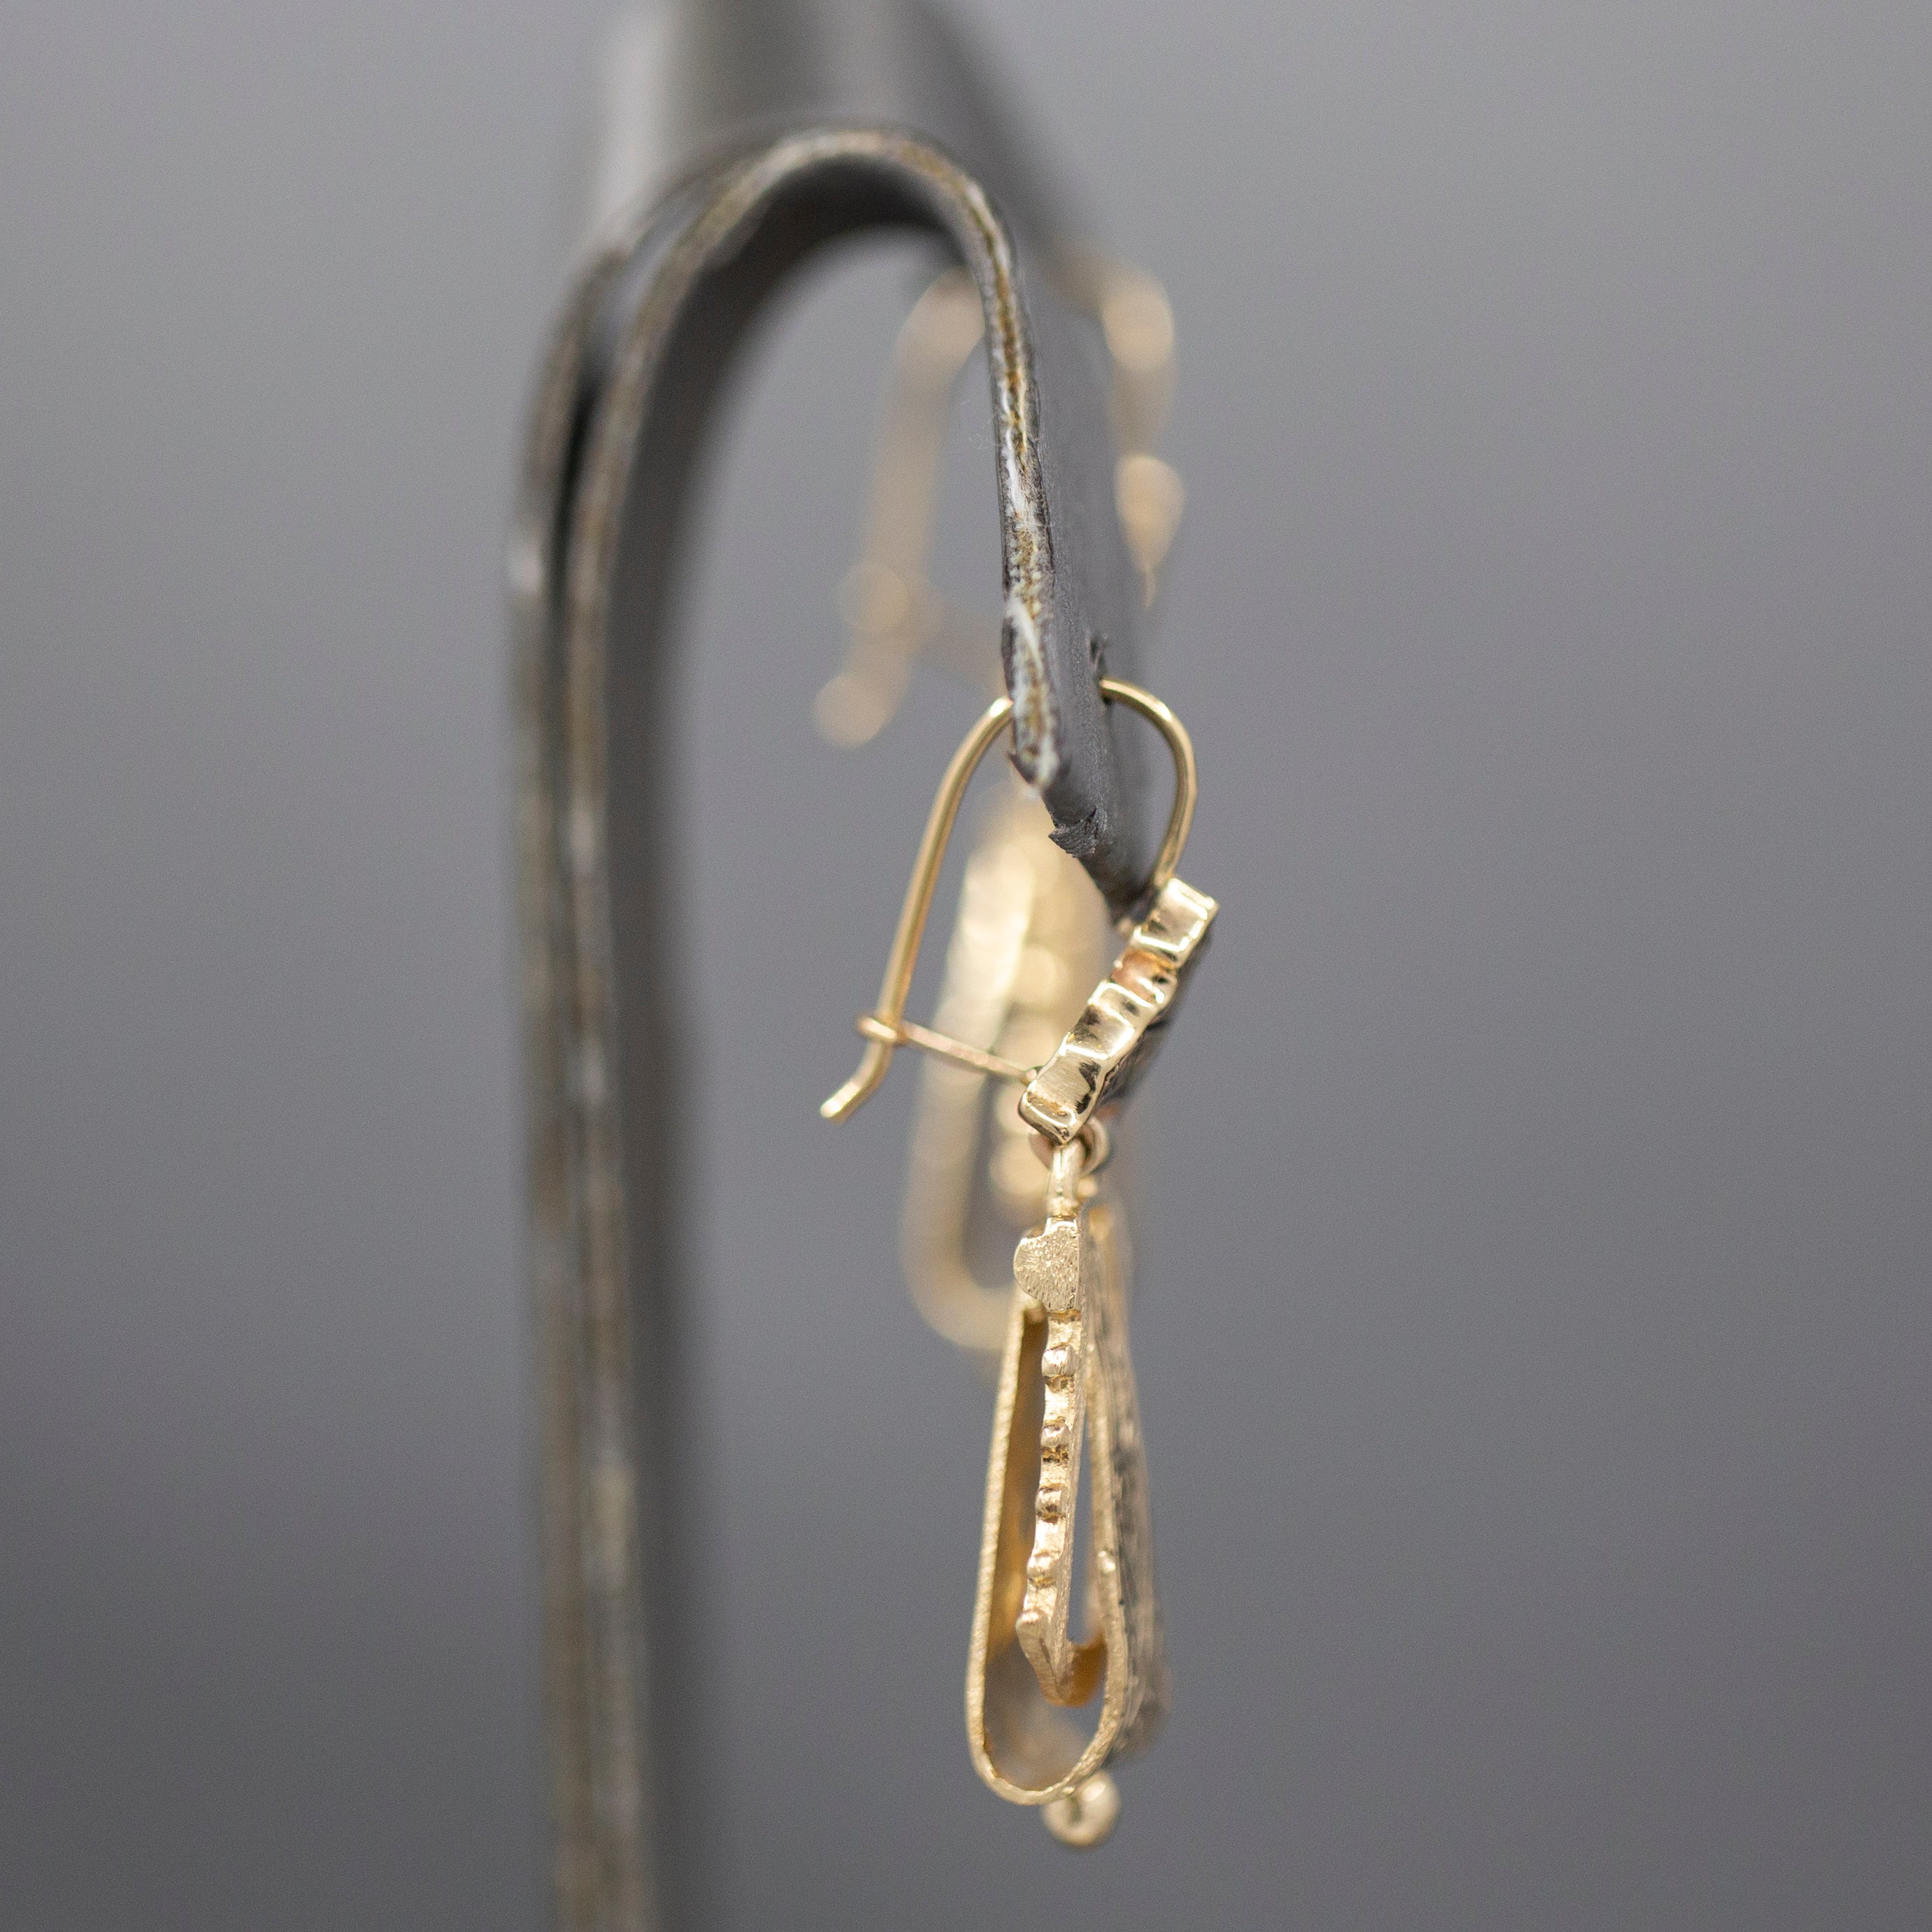 Antique Victorian Architectural Dangle Earrings in 14k Yellow Gold